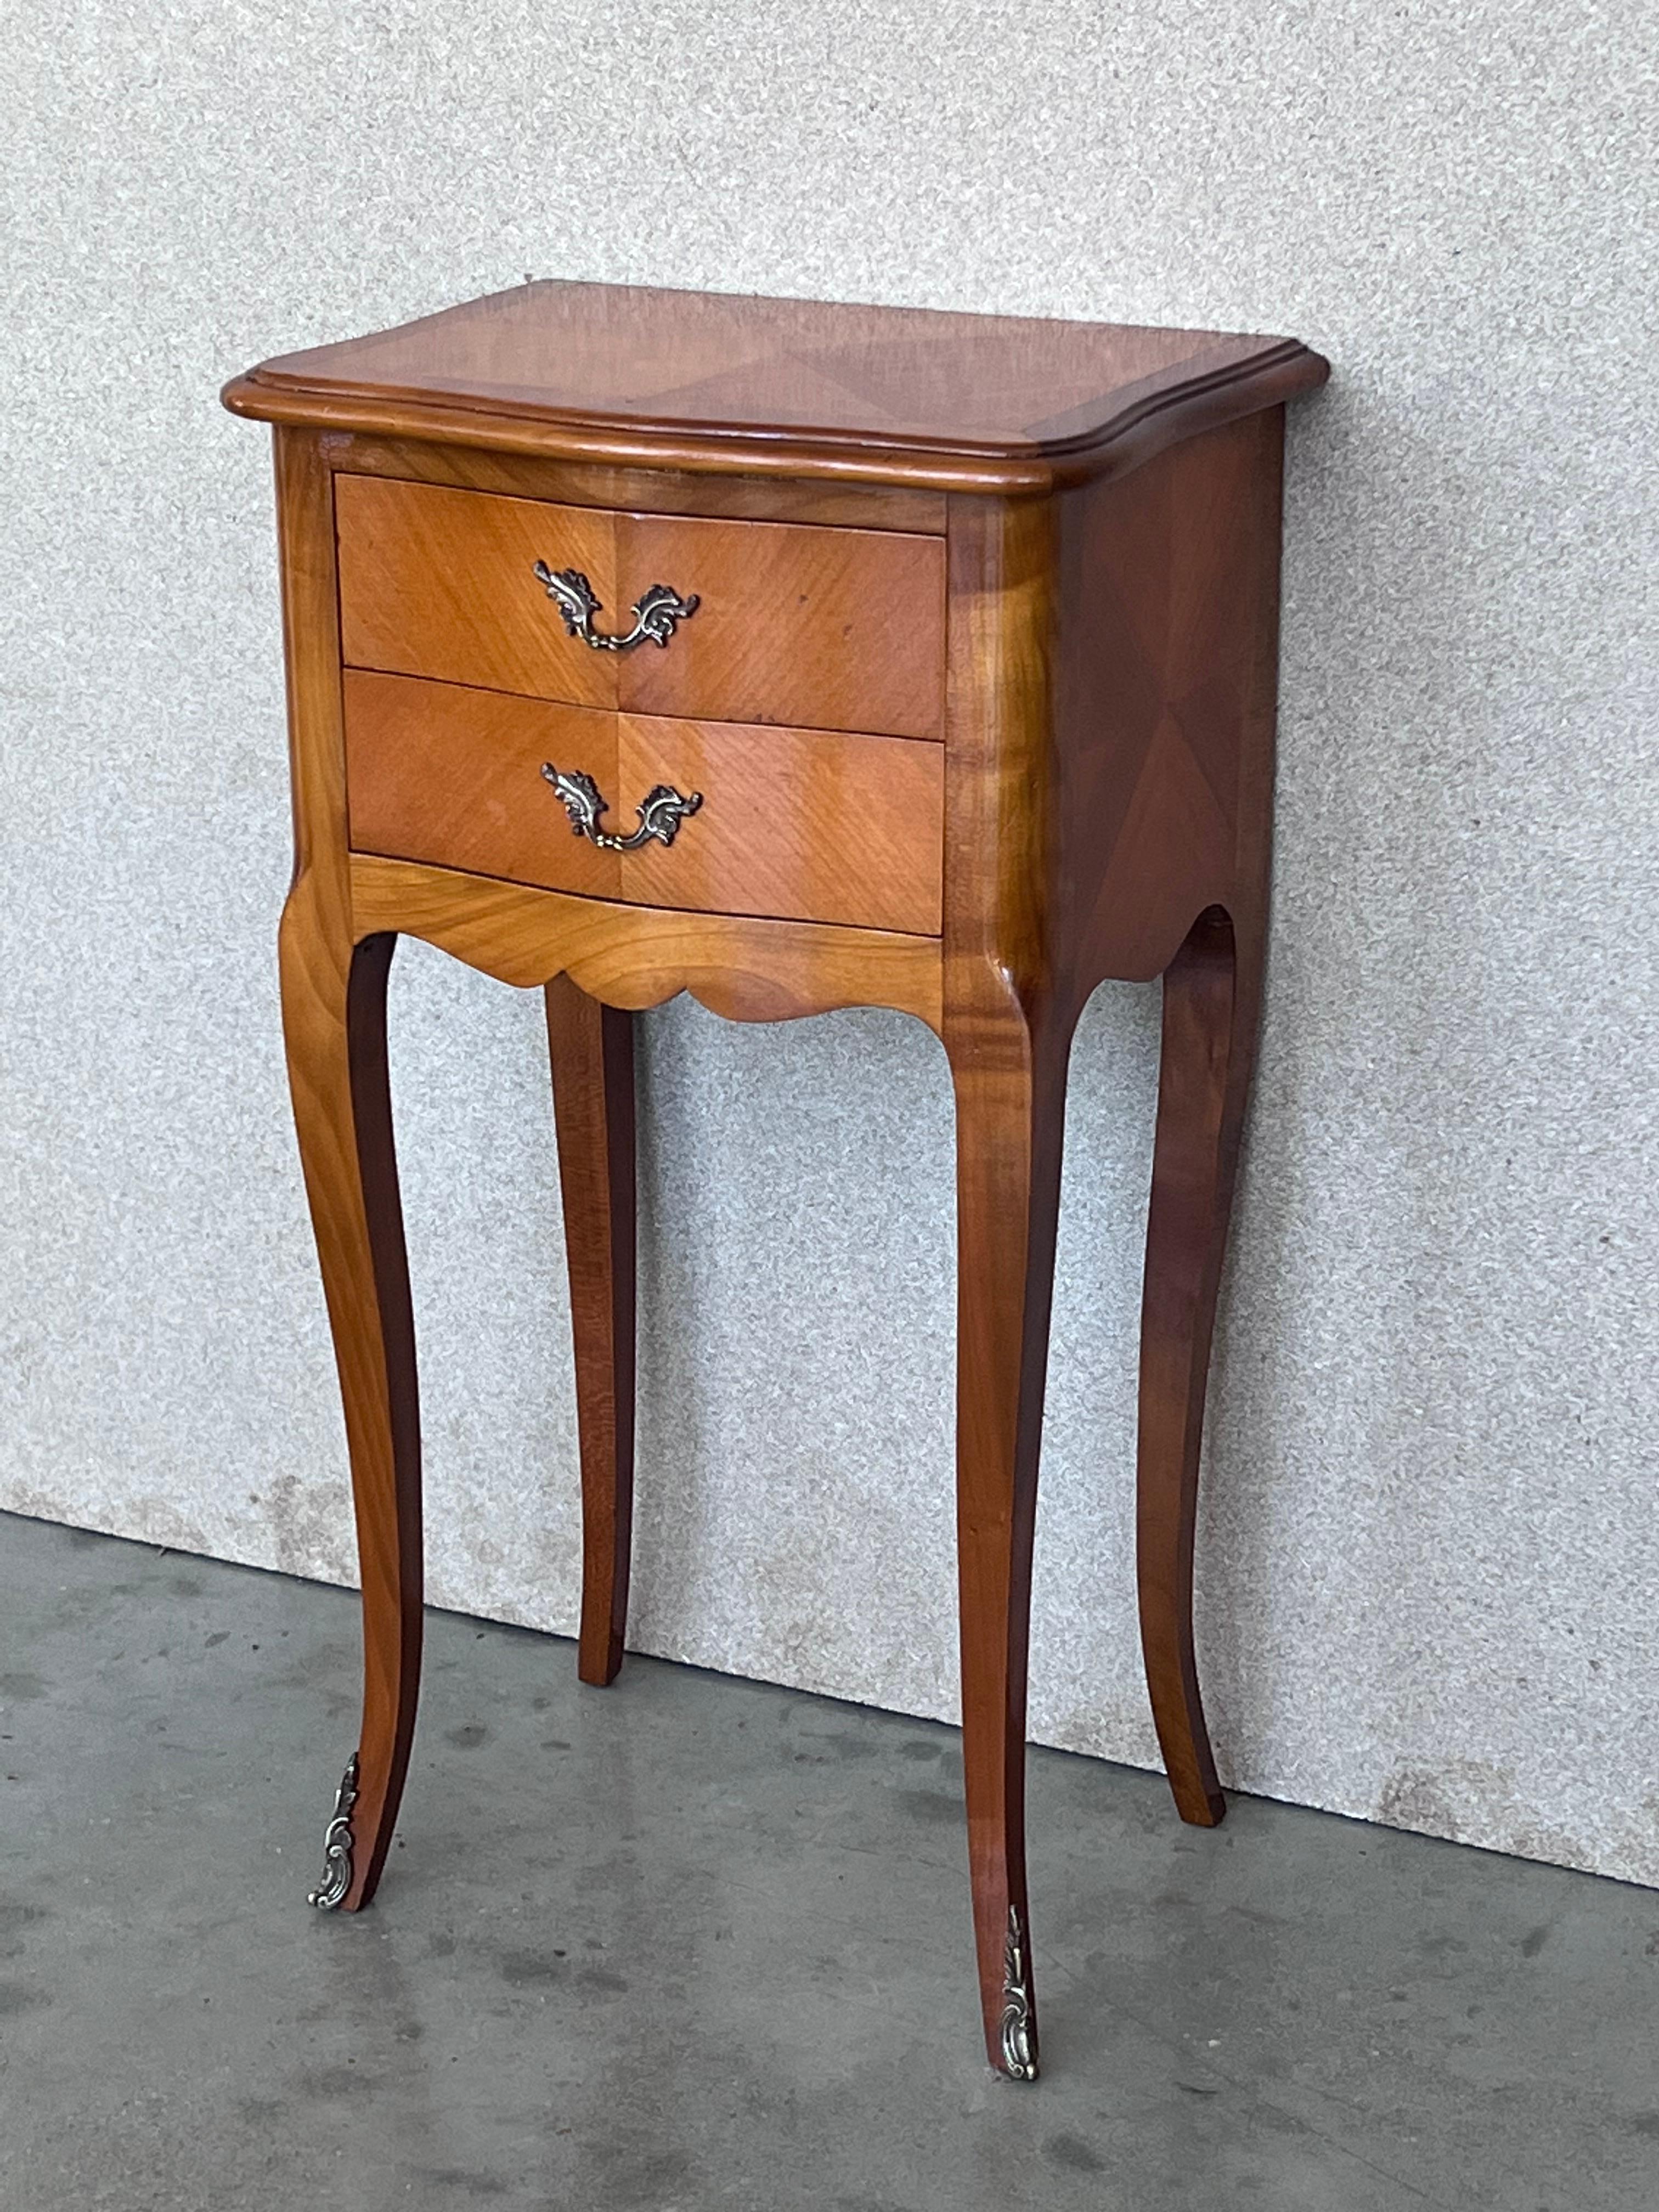 Antique Country French nightstands are the ideal combination of size, form and function, making it perfect for a bedside companion, a little storage in the office, or in the family room for magazines, remotes, and a lamp! handcrafted from solid